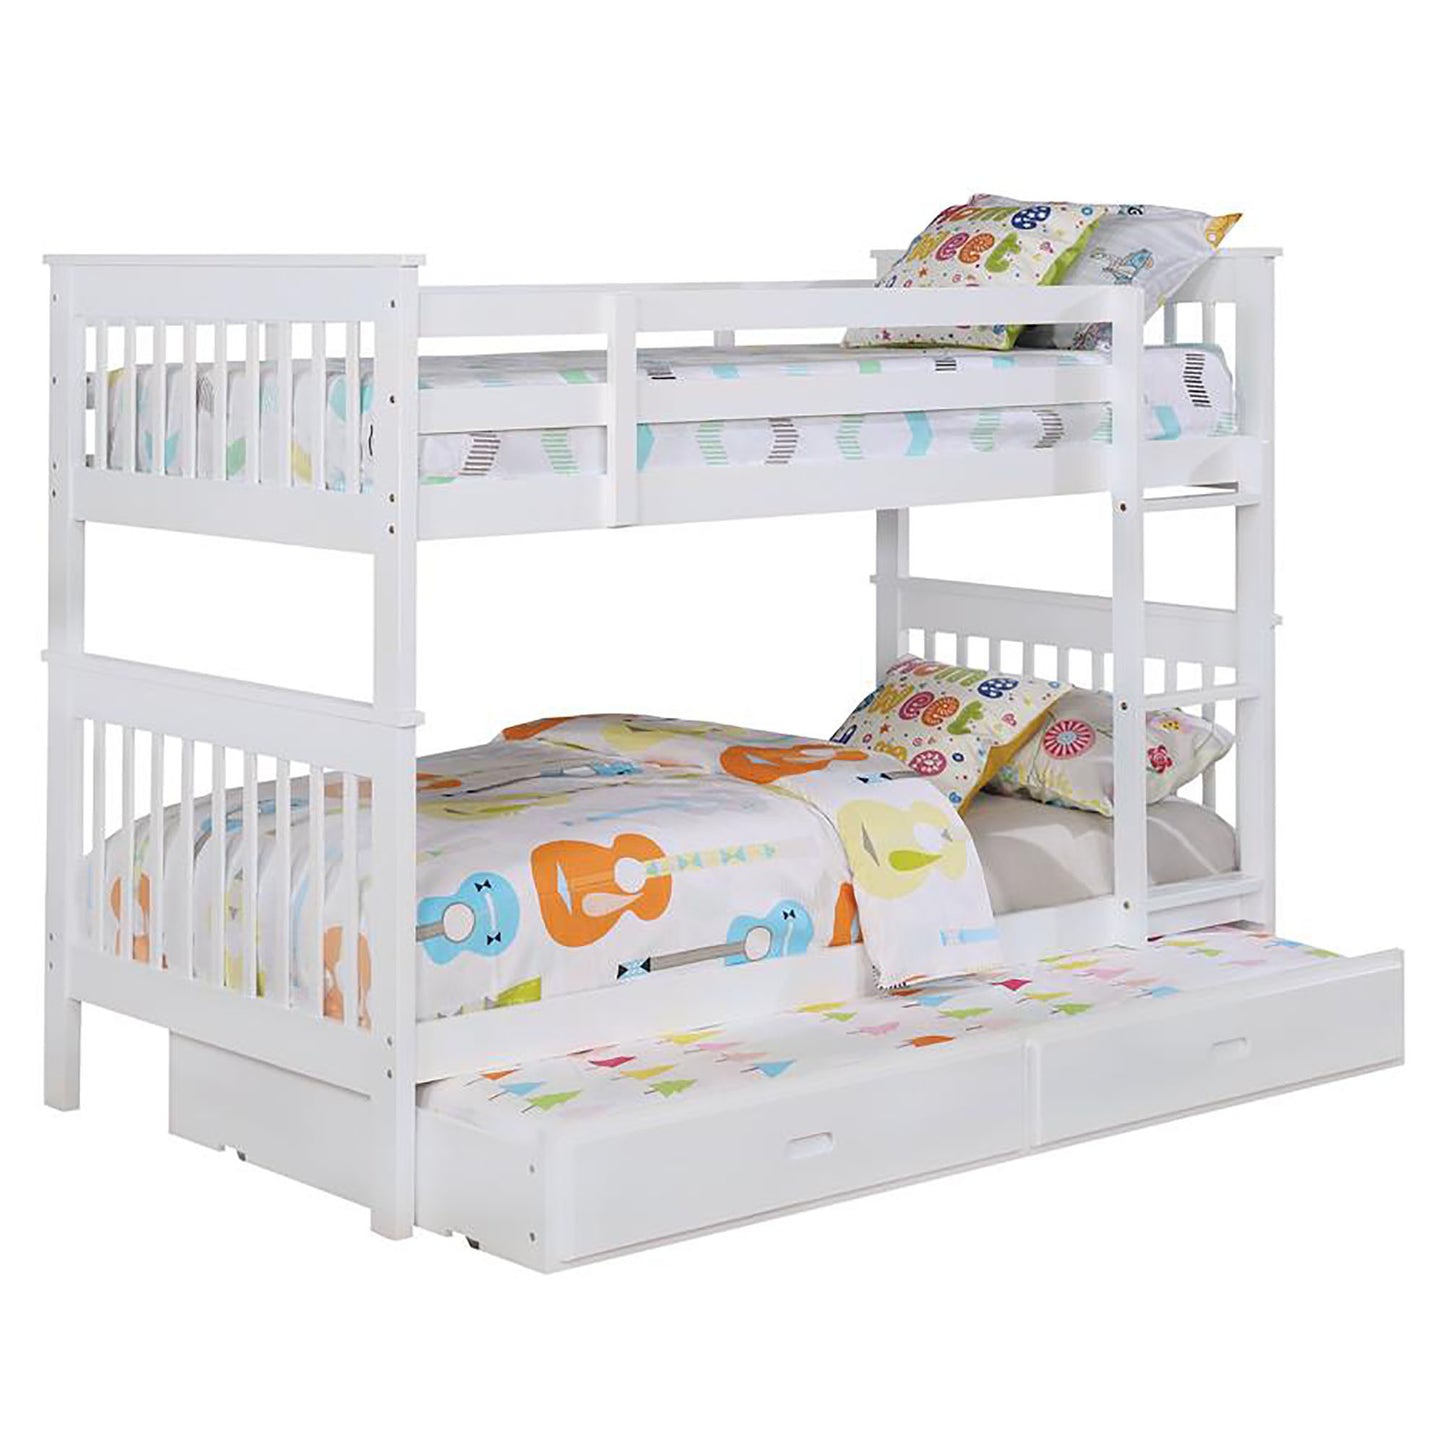 White Wood Slat Twin over Twin Bunk Bed Frame with Headboard